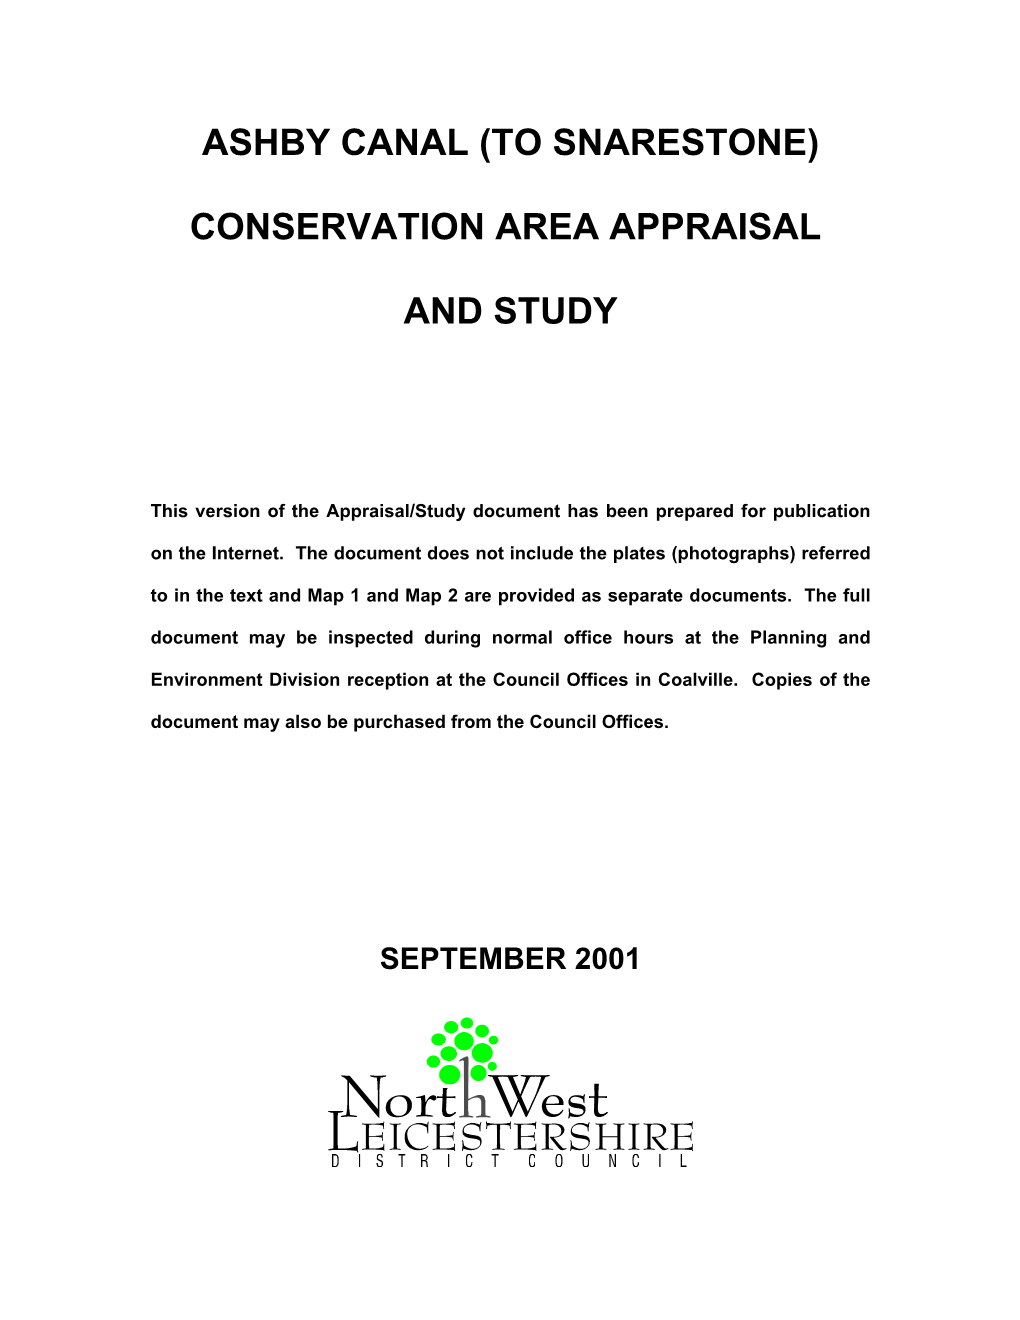 Ashby Canal (To Snarestone) Conservation Area Appraisal and Study